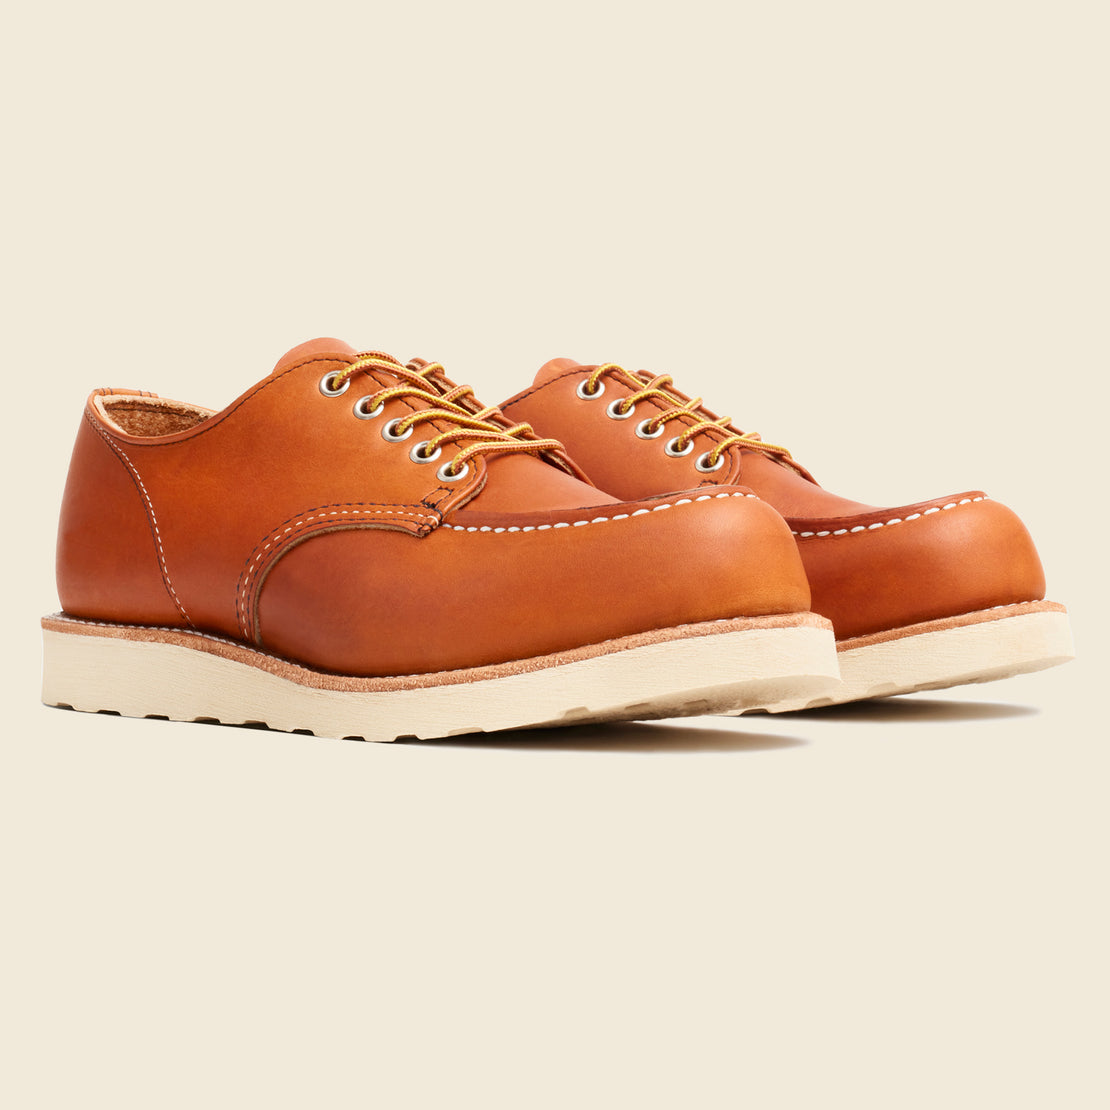 Shop Moc Oxford No. 8092 - Oro Legacy - Red Wing - STAG Provisions - Shoes - Boots / Chukkas